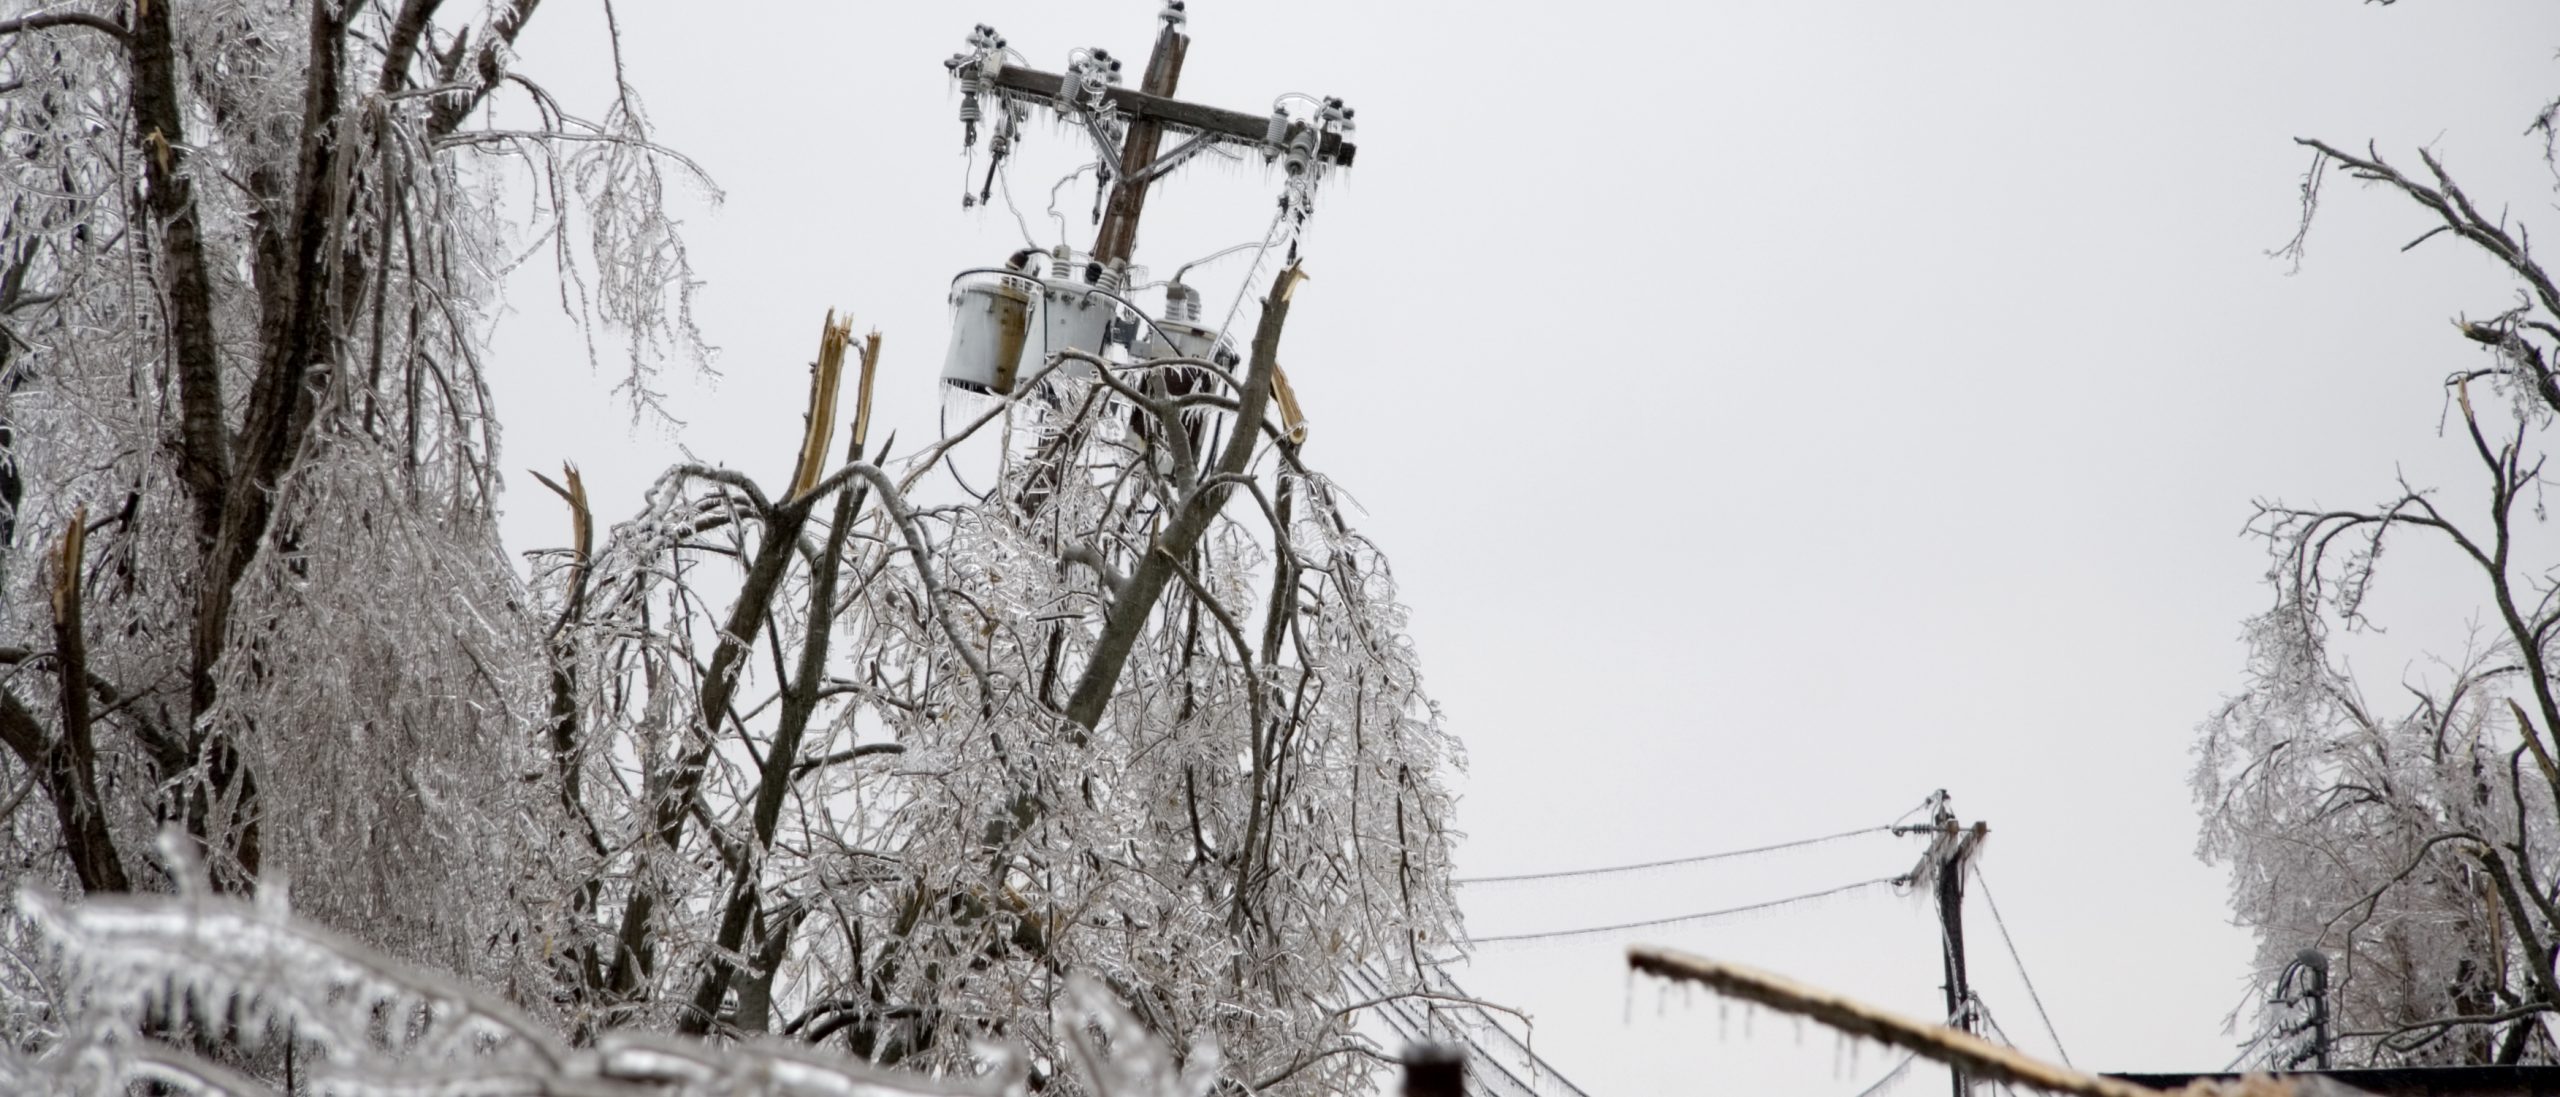 icy trees and power lines.